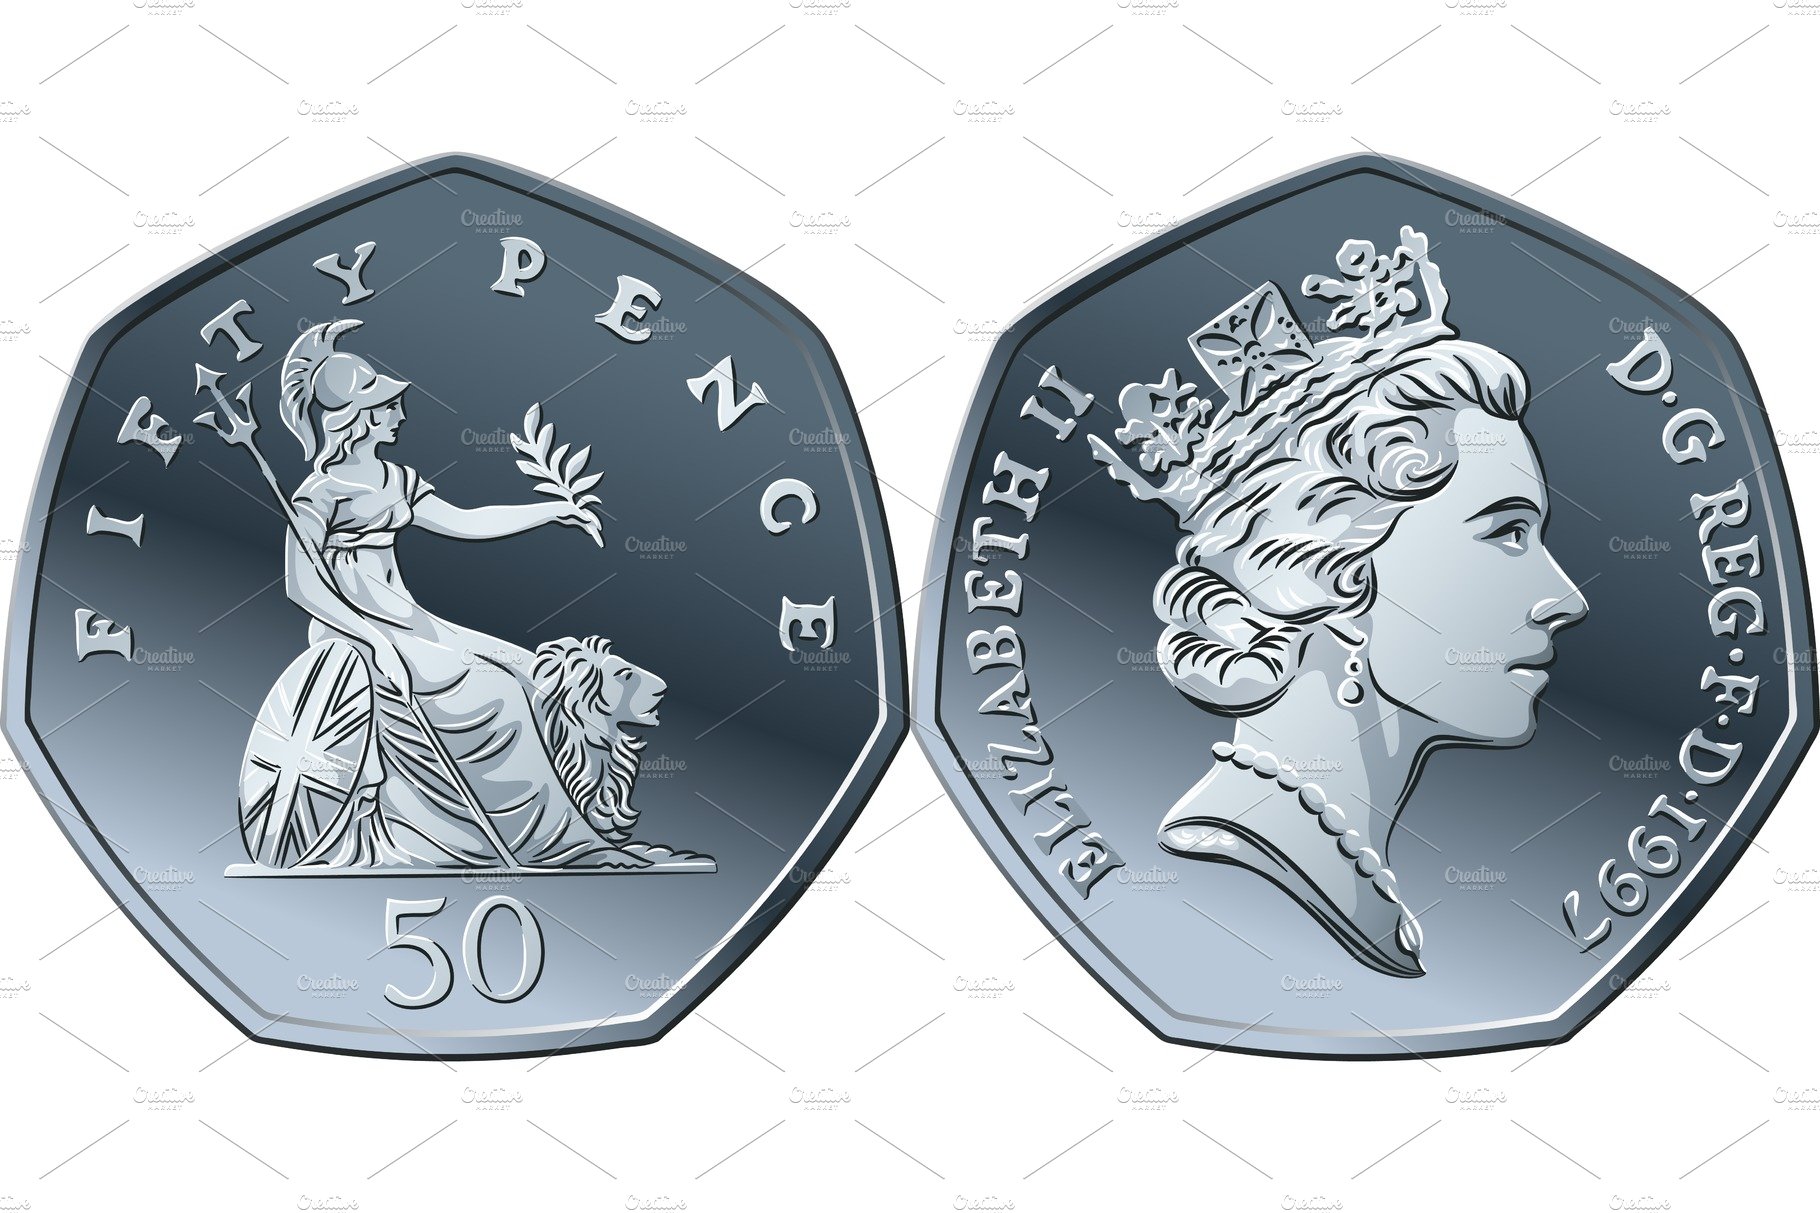 A 50p coin with the image of a woman and a dog.